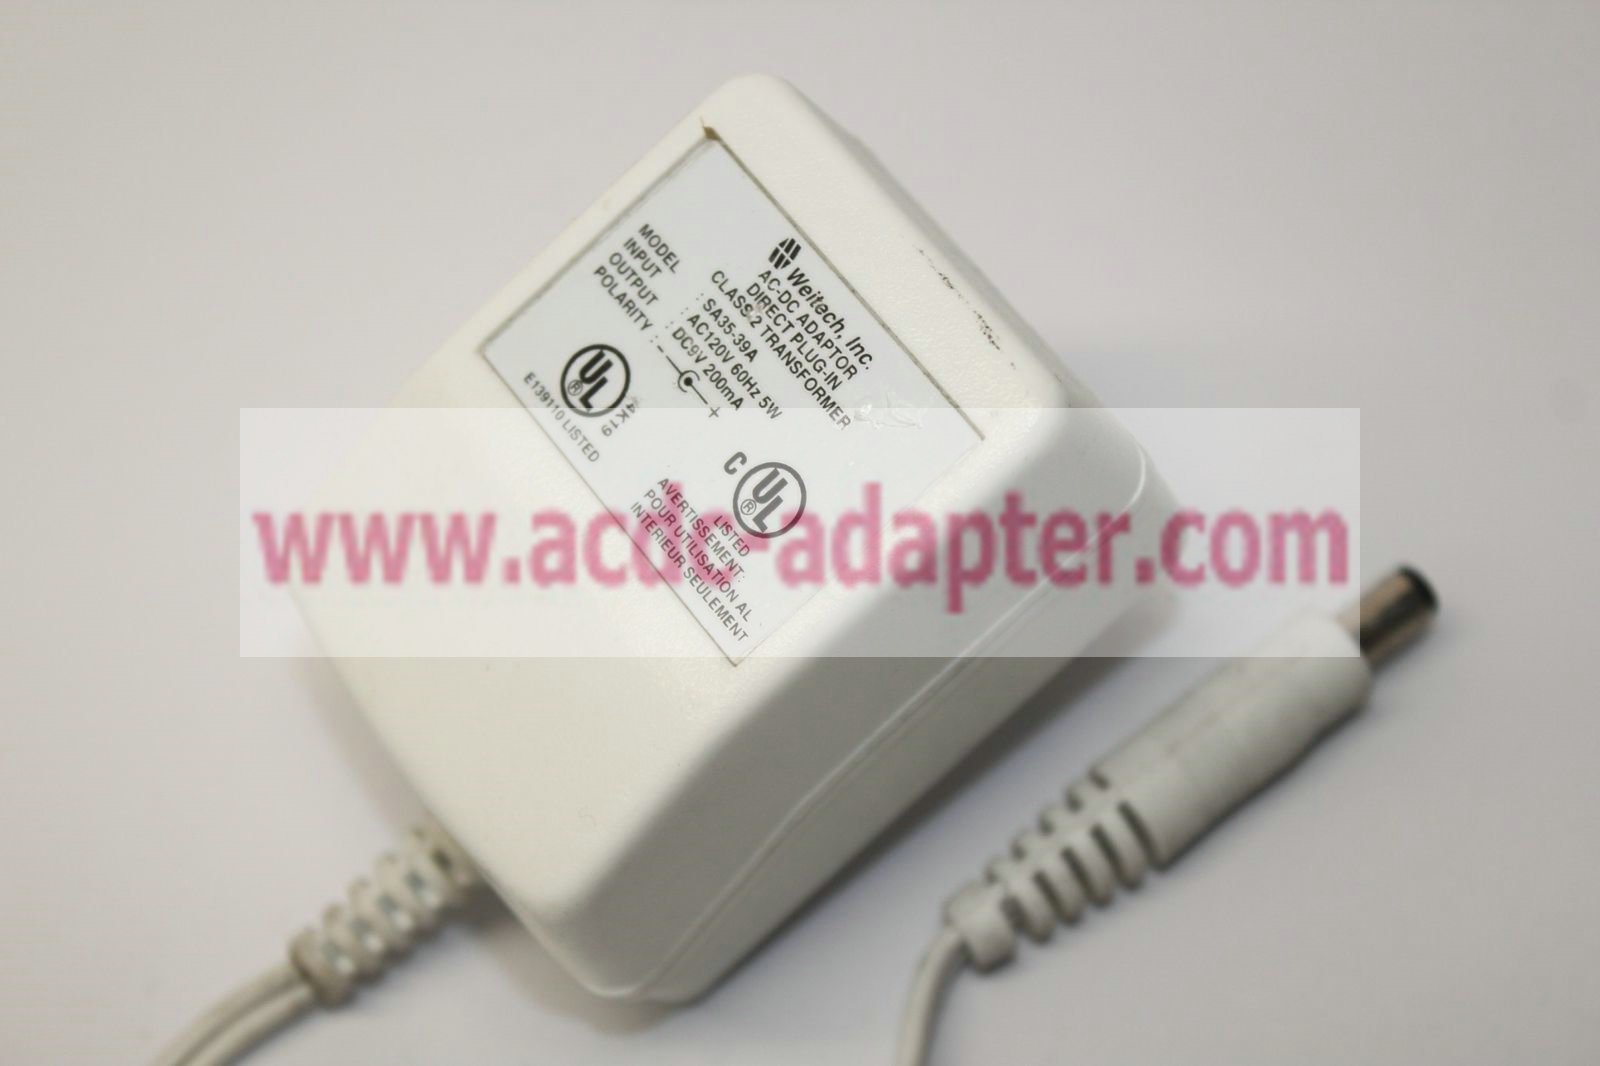 New Weitech SA35-39A 9V 200mA Plug In Class 2 Transformer AC/DC Adapter - Click Image to Close